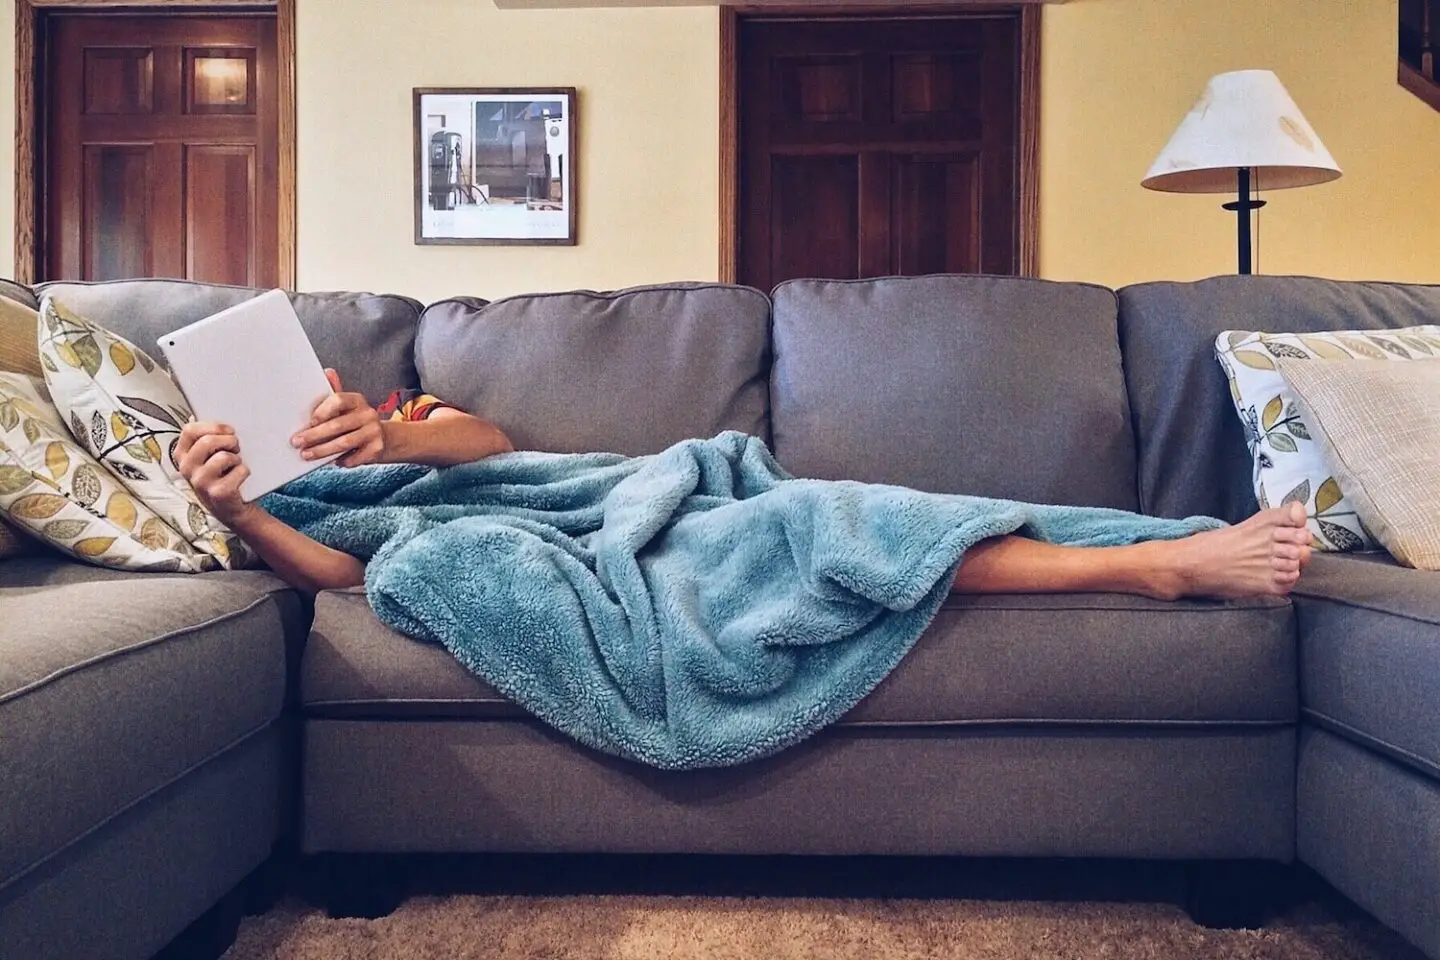 A person lying on a grey sofa. Most of their body is covered by a blue blanket and they are holding up an i-pad that covers their face.